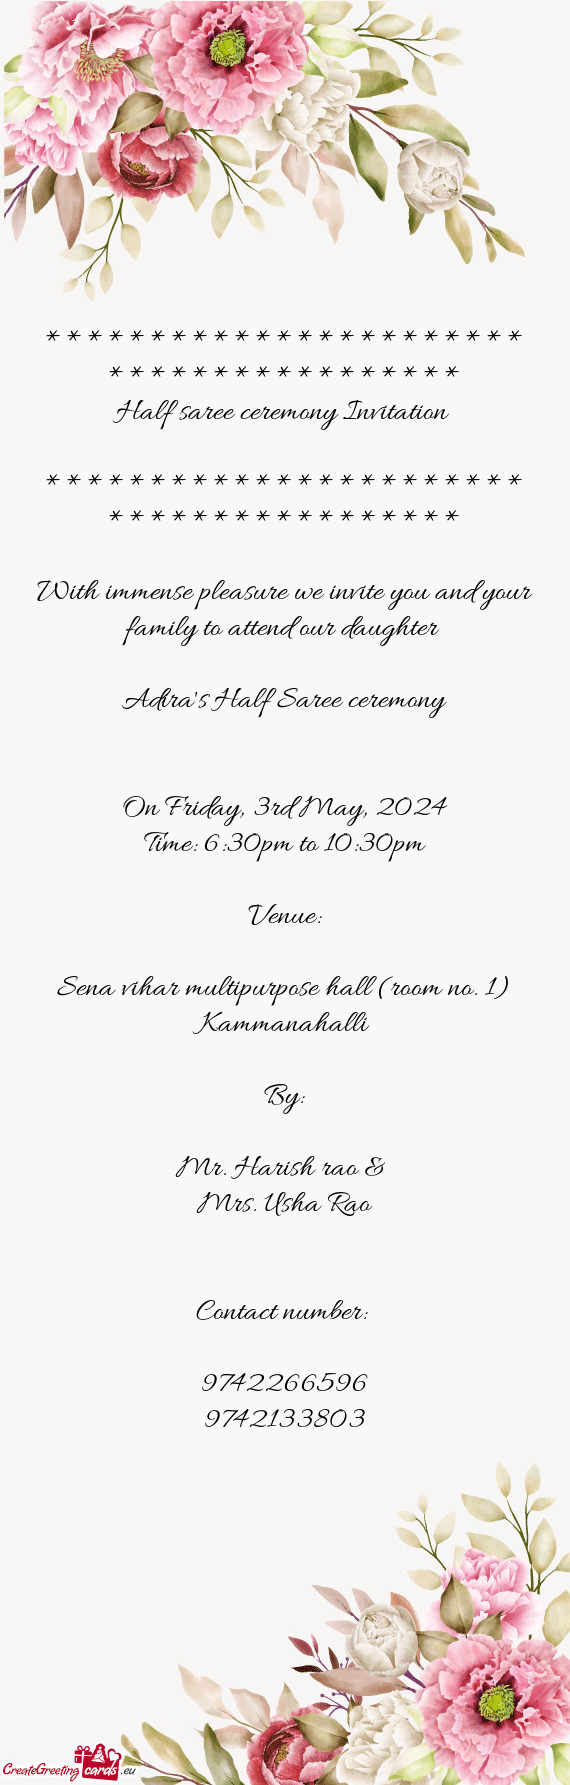 With immense pleasure we invite you and your family to attend our daughter